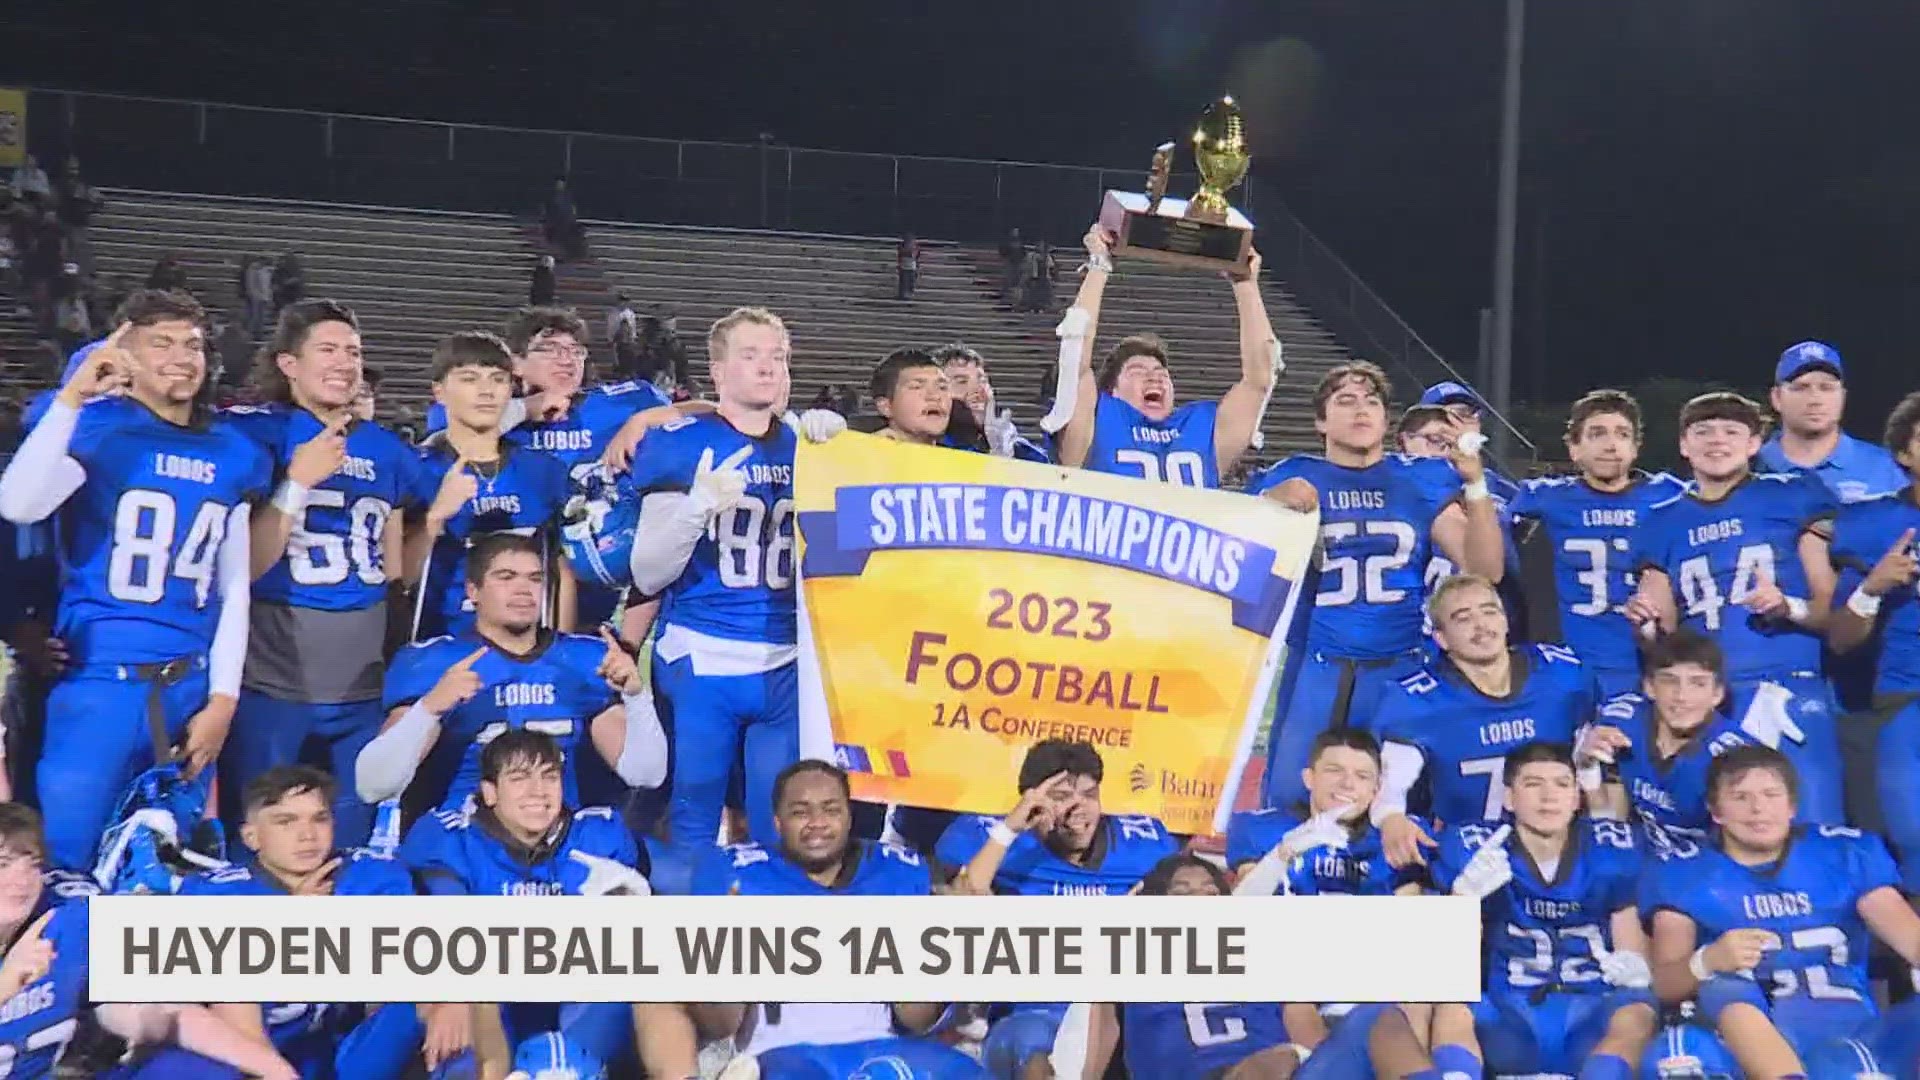 The Hayden Lobos won their first state title since 1972, beating the 3-time defending 1A state champ, Mogollon Mustangs, 62-30